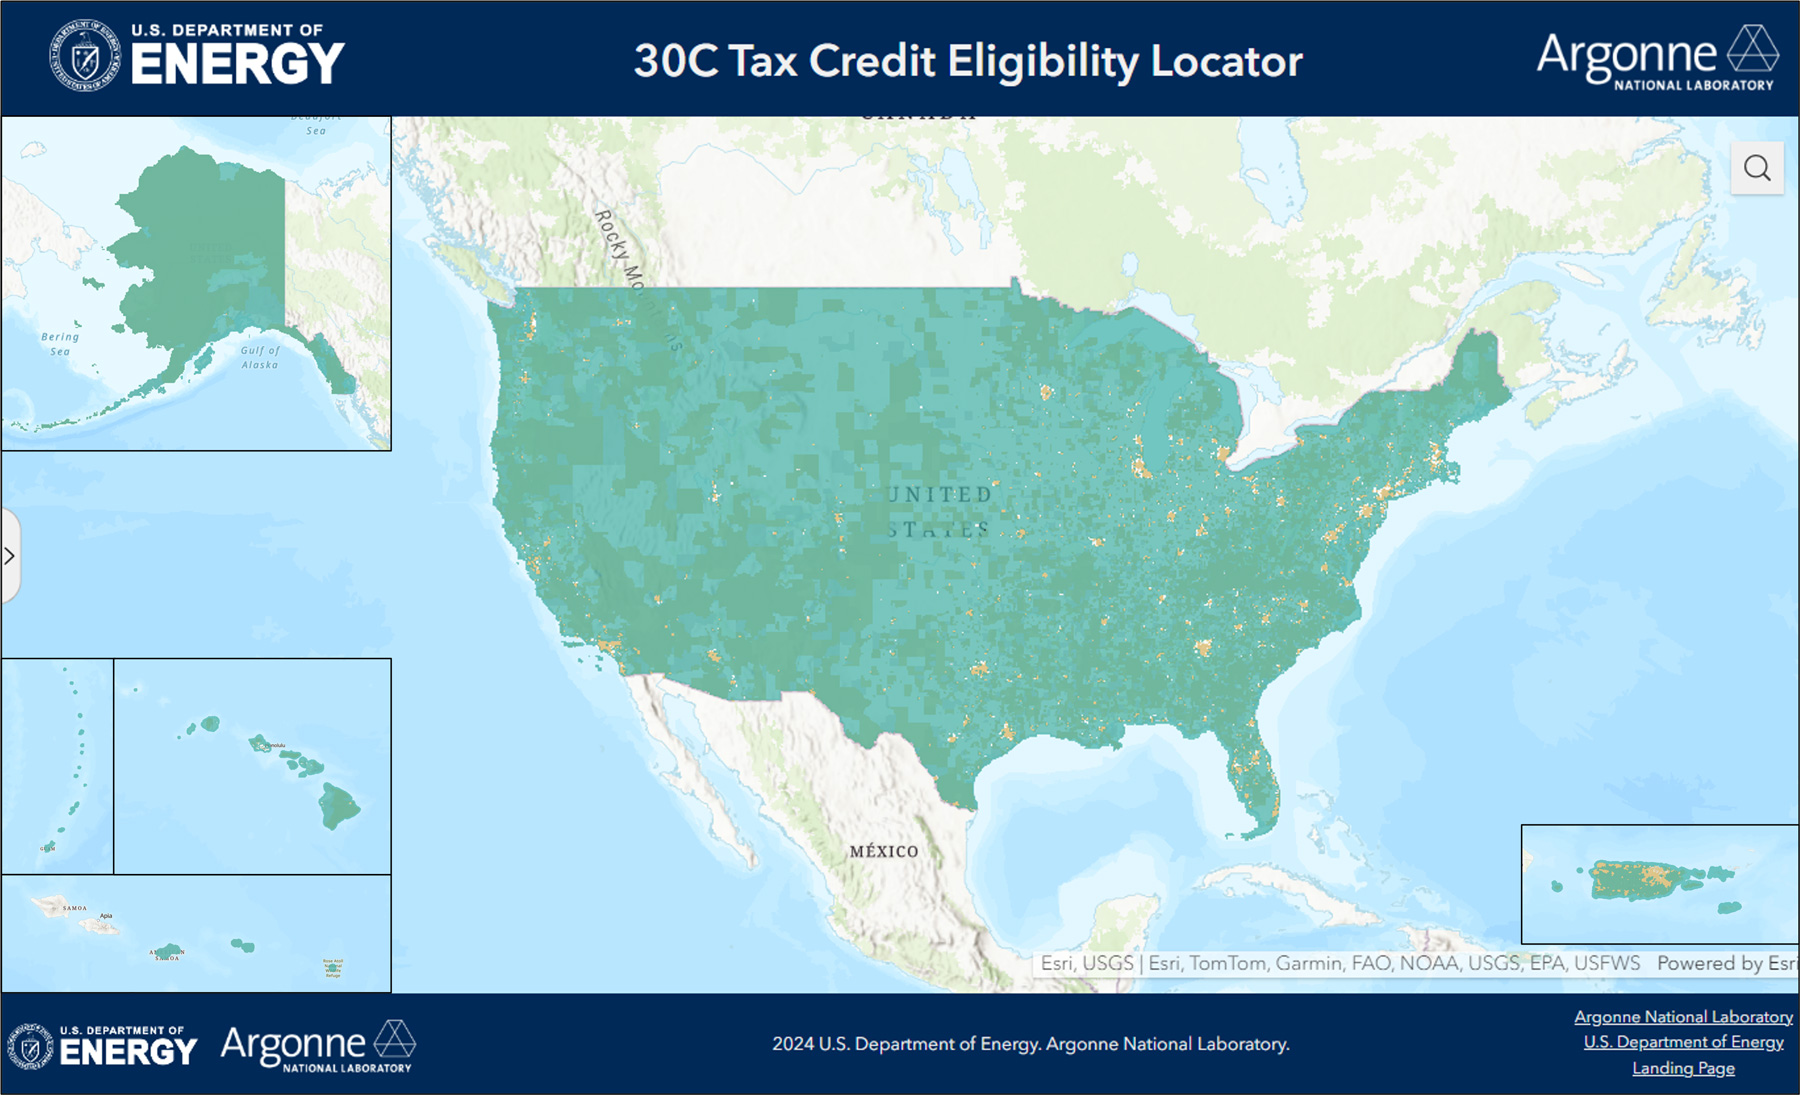 Preview of the 30C tax credit tool showing a map of the U.S.